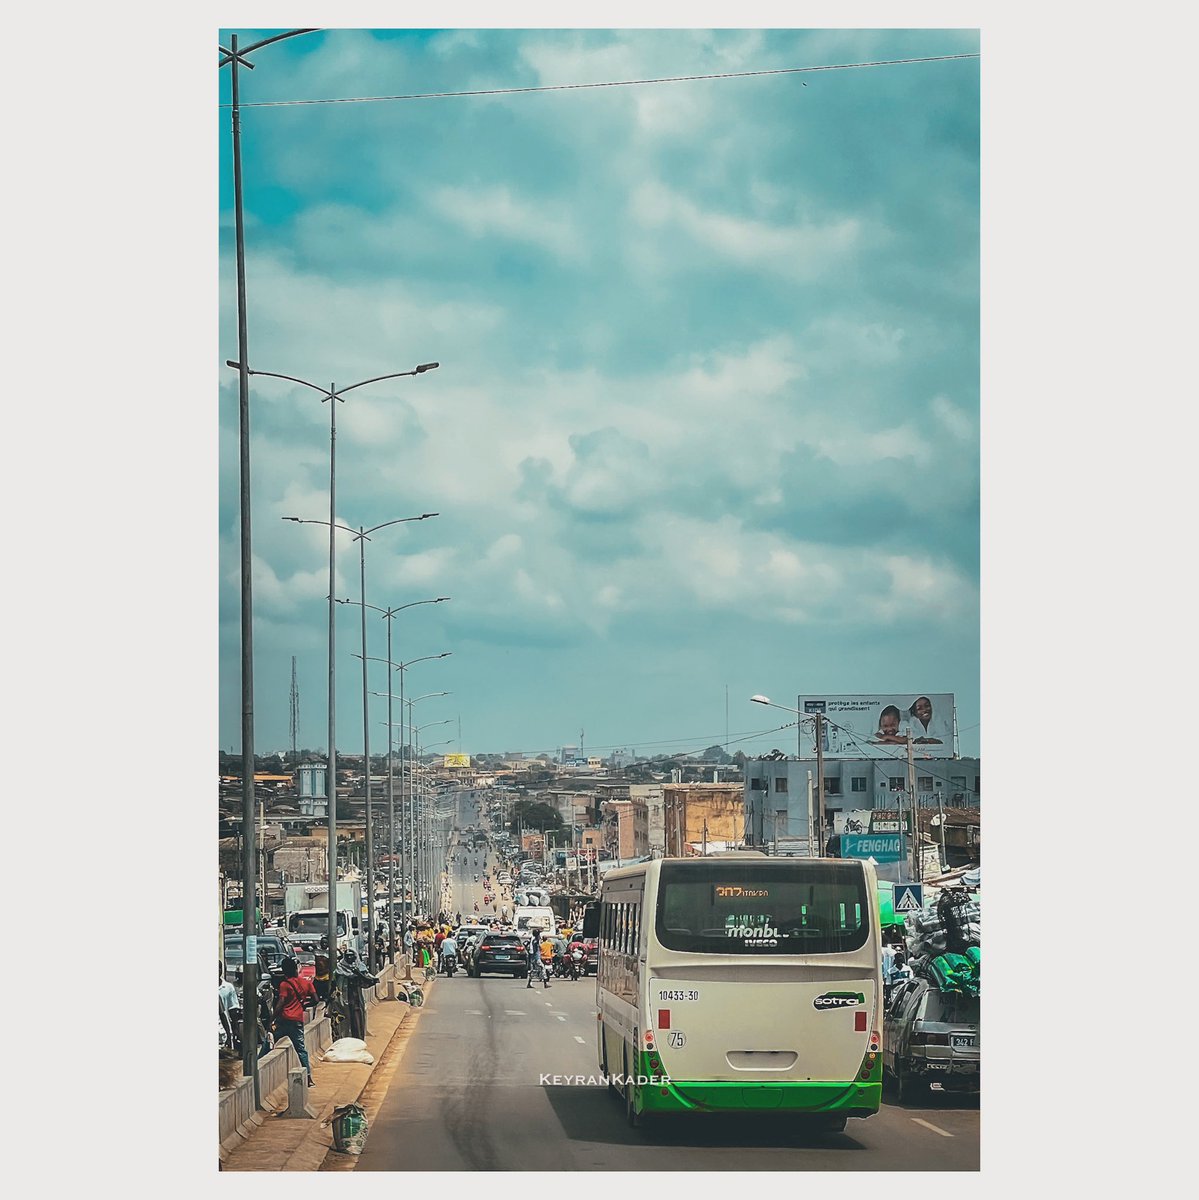 Some views of Bouaké streets 

Shoot by me 🤝
#travelphotography 
#streetphotography #streetshoot